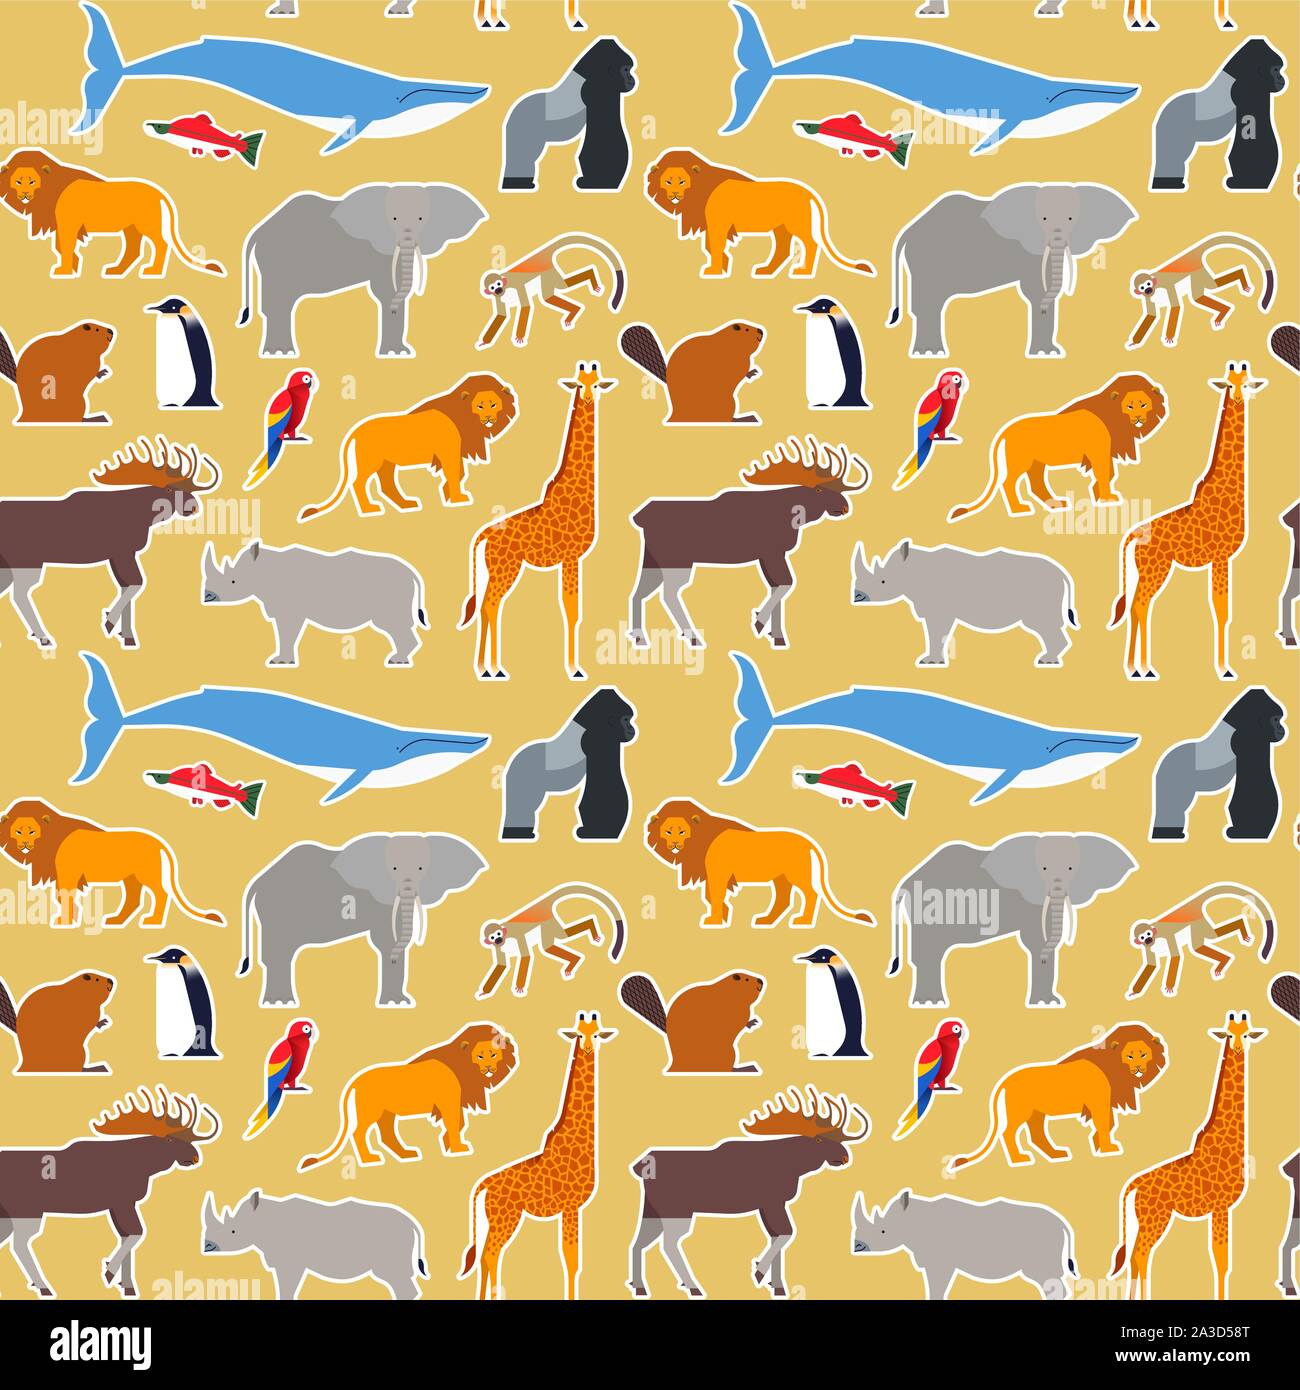 Animal seamless pattern of diverse wild animals cartoon icons for educational wildlife children design or endangered fauna background. Stock Vector